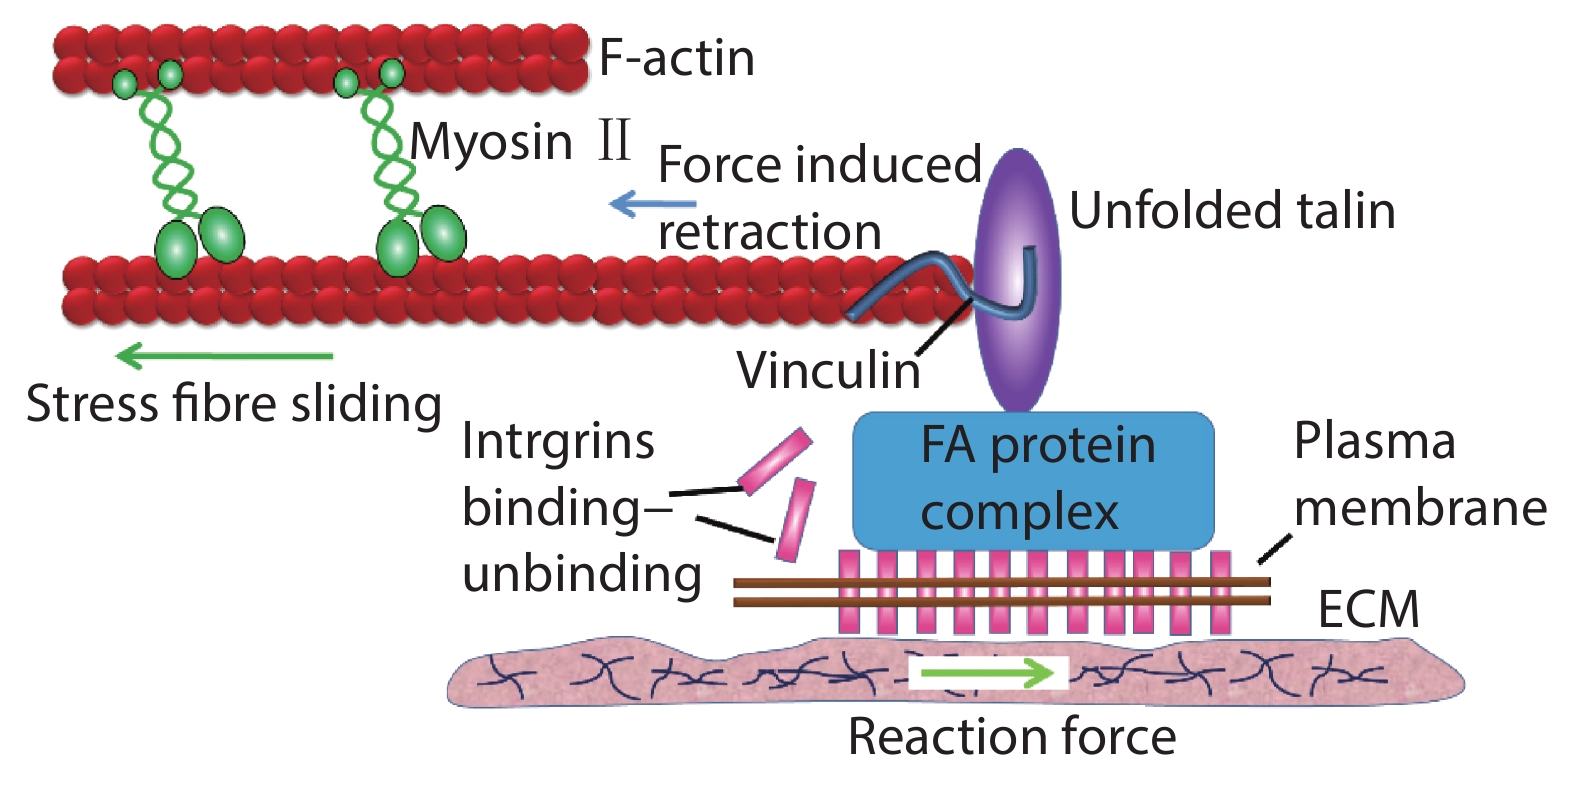 (Color online) Molecular dynamics at adhesion complexes. The actin network as a mechanosensitive machine connecting the cell to its substrate and neighbors. The building of a stable focal adhesion (FA) complex for cell–substrate adhesion. Actomyosin forces apply on the FA at a fixed speed and the rate of force increase in the complex increases proportionally with the ECM stiffness. To avoid the destabilization and detachment of the FA, the binding-unbinding dynamics of the transmembrane protein, integrin, that connects the cells to the substrate needs to be equal to the force loading rate in the complex. Another force buffer and mechanosensor in the complex is Talin. Its unfolding at ~ 10 pN at the normal rate of force loading in cells lead to vinculin binding to recruit more actin fibers, thus reinforcing the FA.